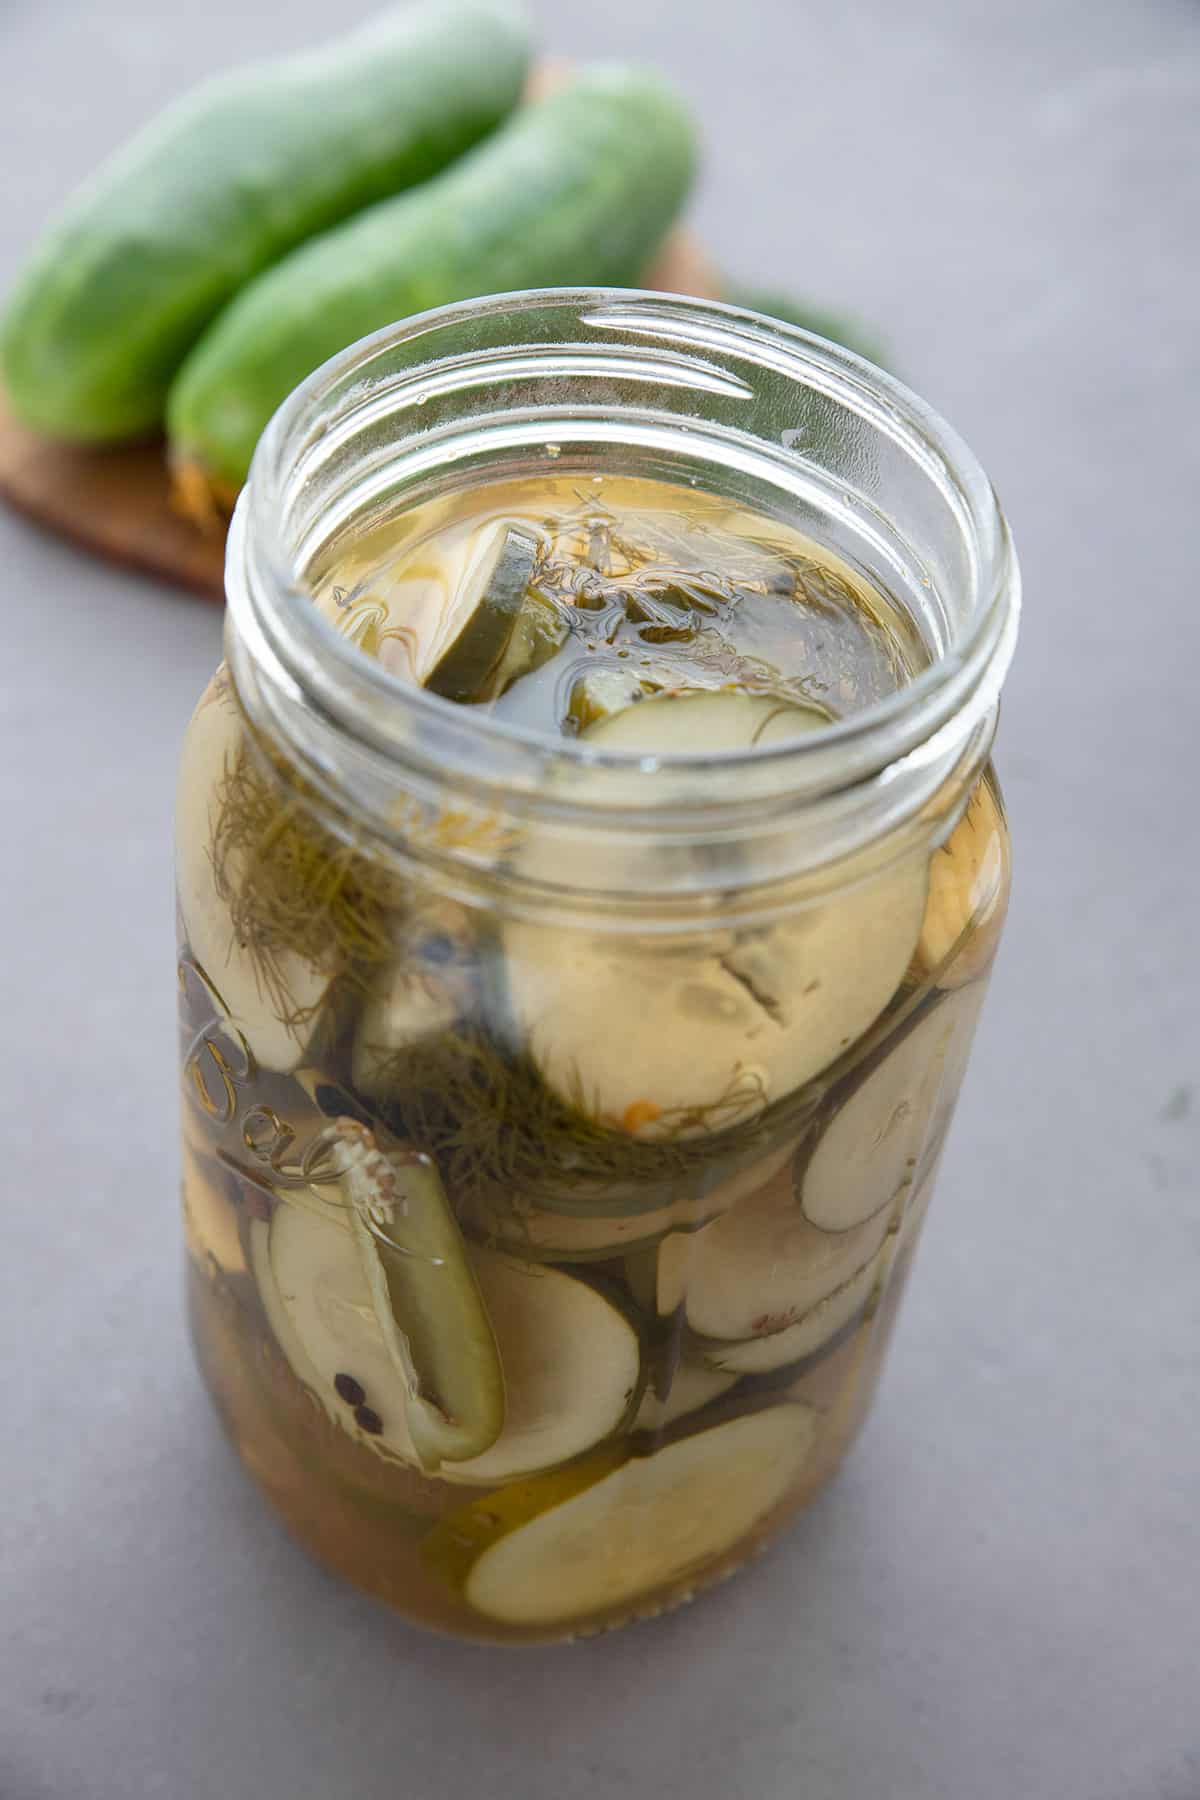 A jar of keto refrigerator pickles in front of a cutting board with cucumbers on it.